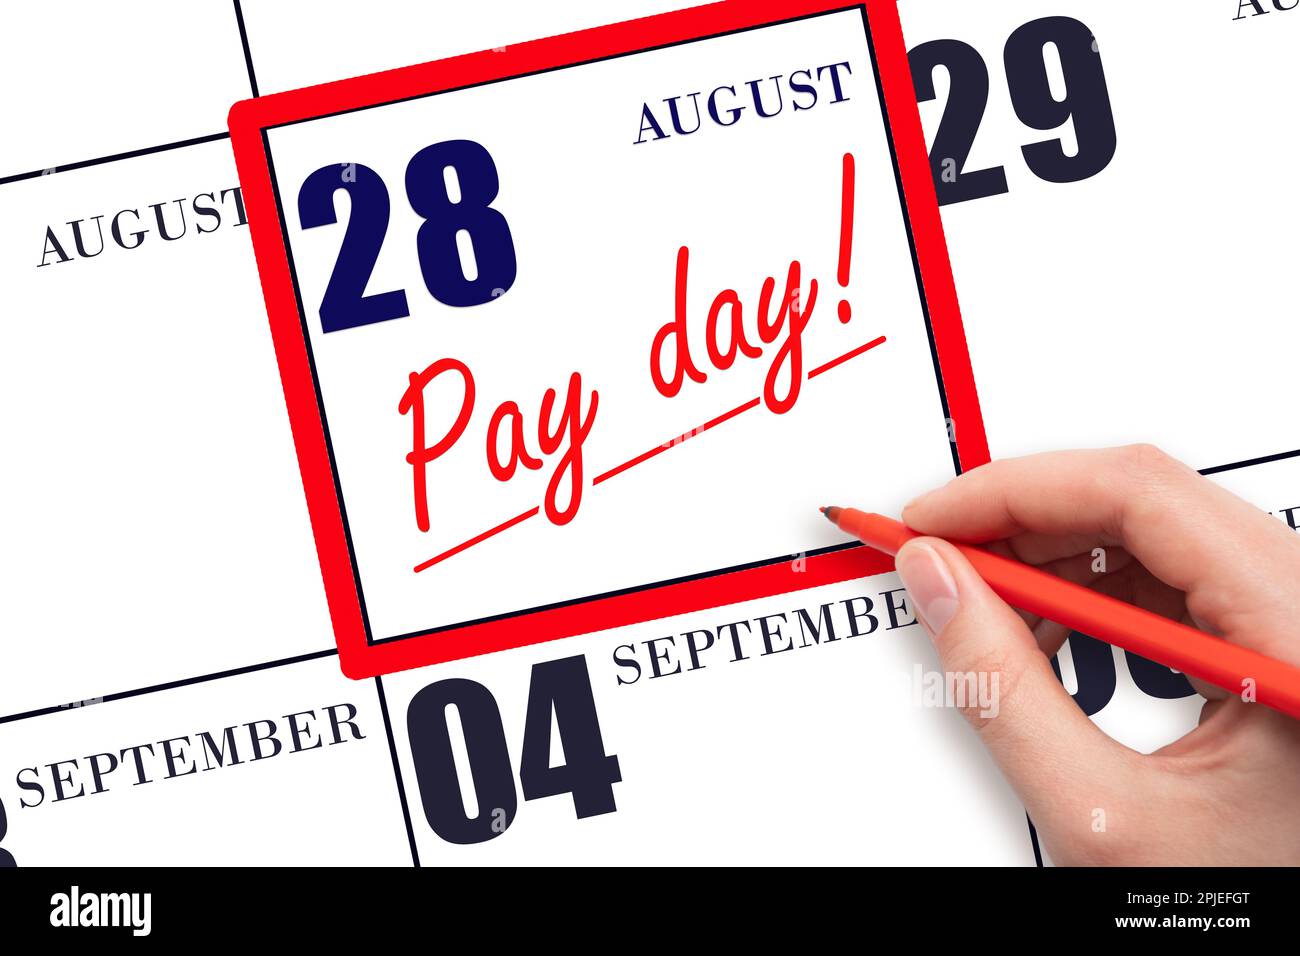 28th day of August. Hand writing text PAY DATE on calendar date August 28 and underline it. Payment due date. Reminder concept of payment. Summer mont Stock Photo